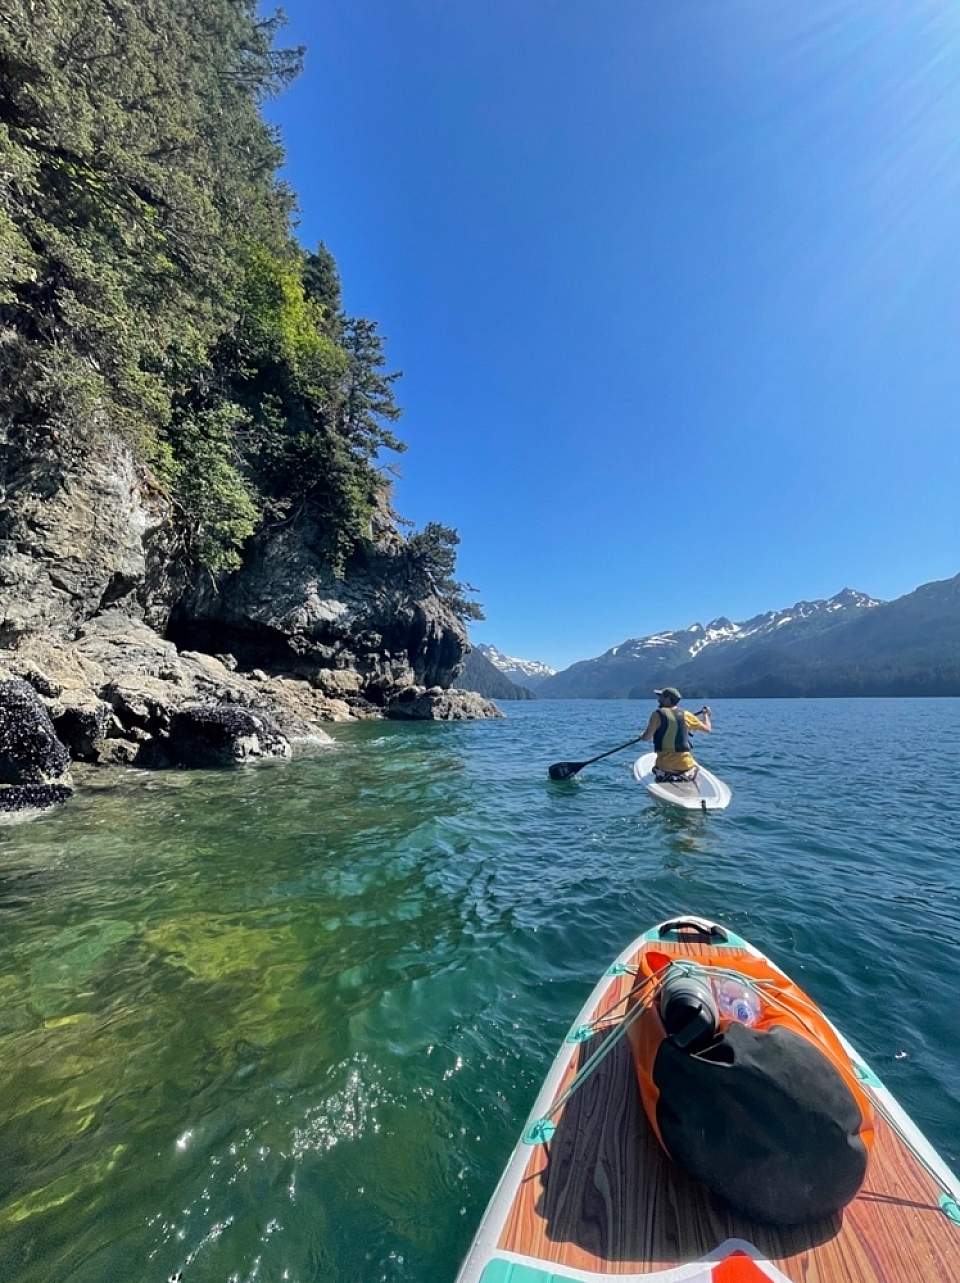 Explore the waters of Kachemak Bay on a stand up paddleboard.